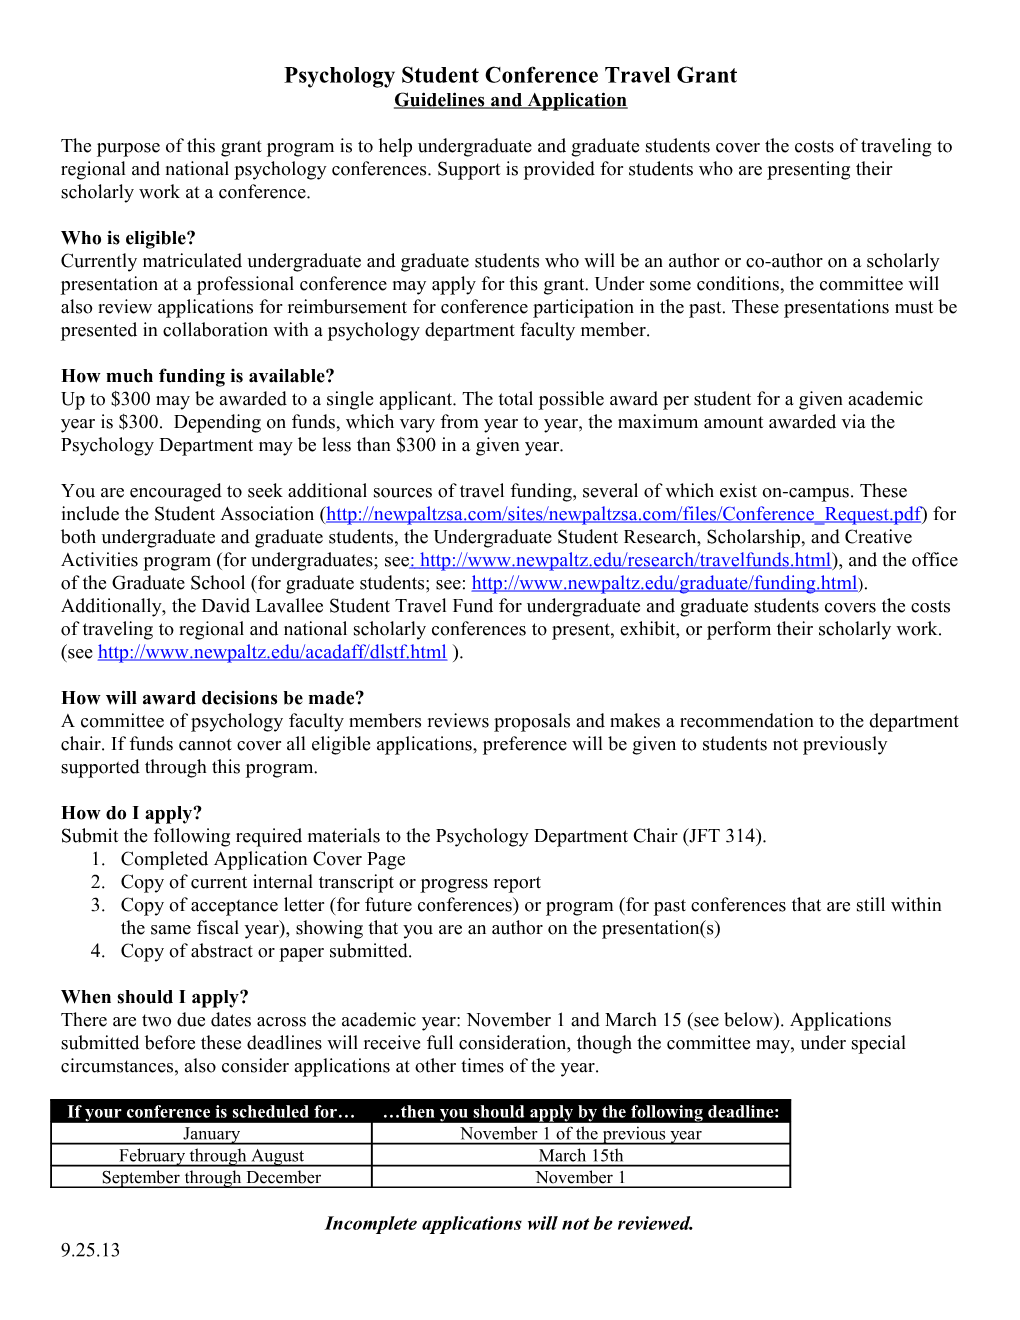 Psychology Student Conference Travel Grant Guidelines